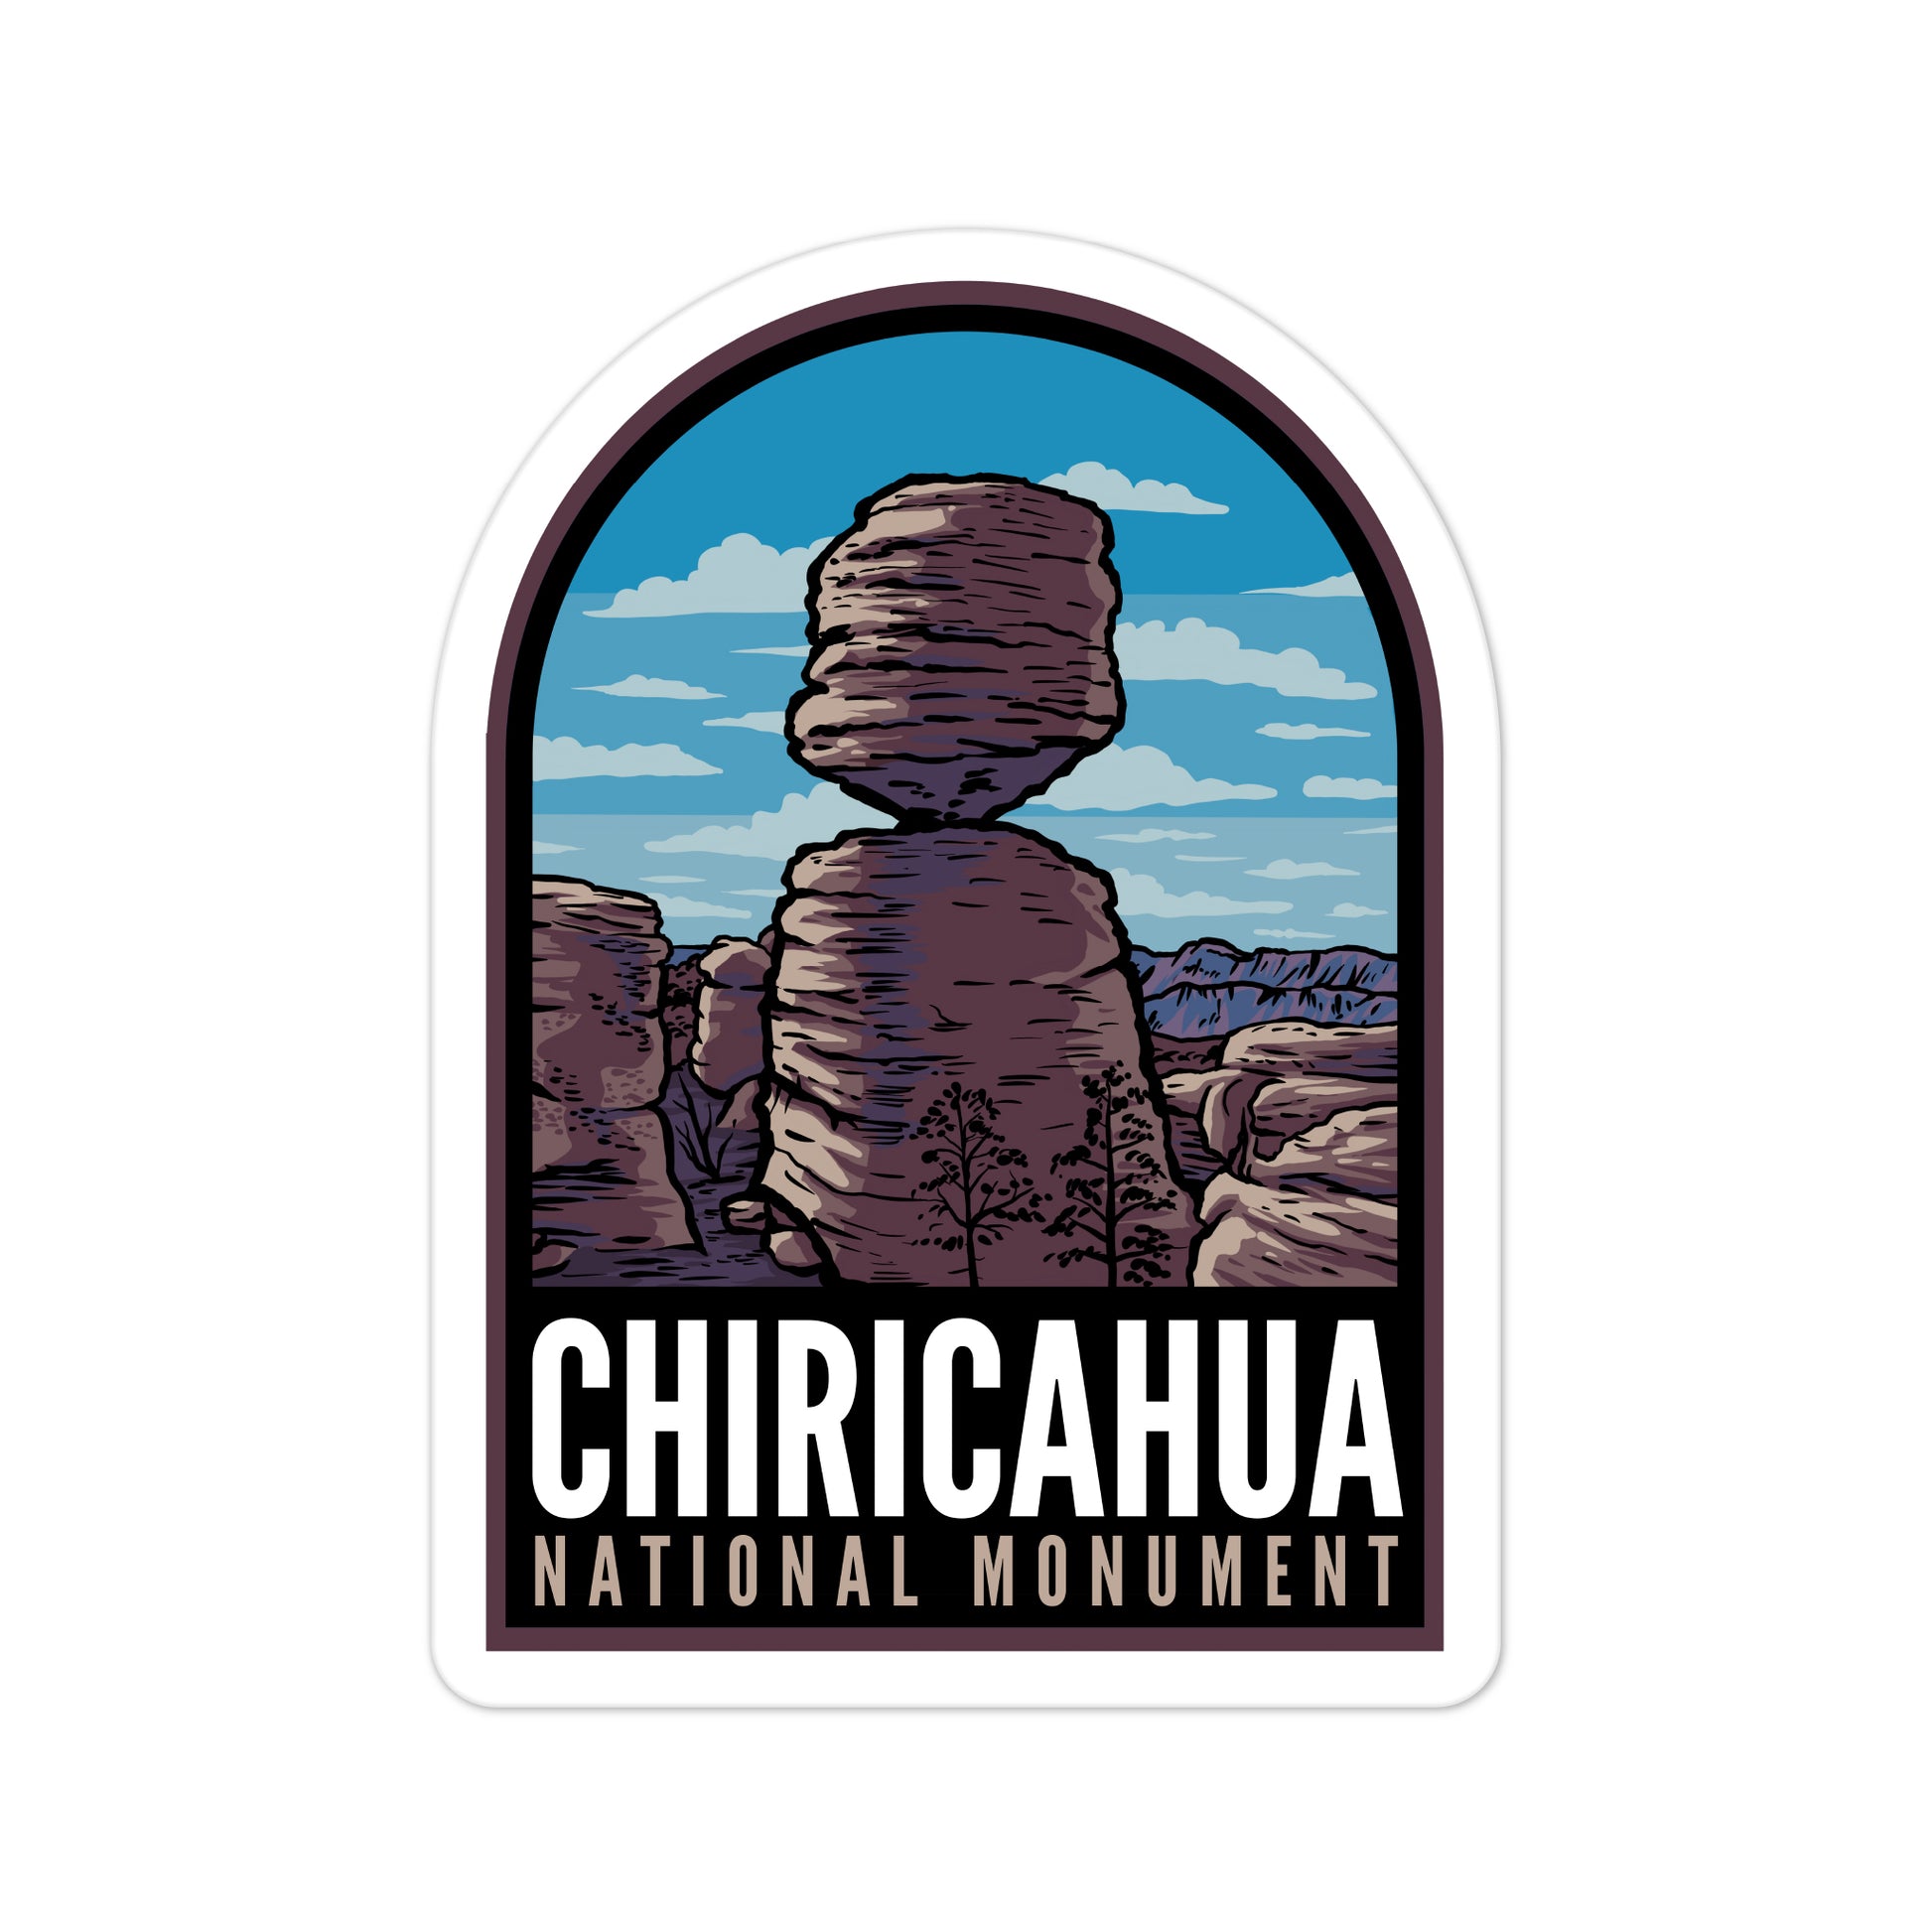 A sticker of Chiricahua National Monument